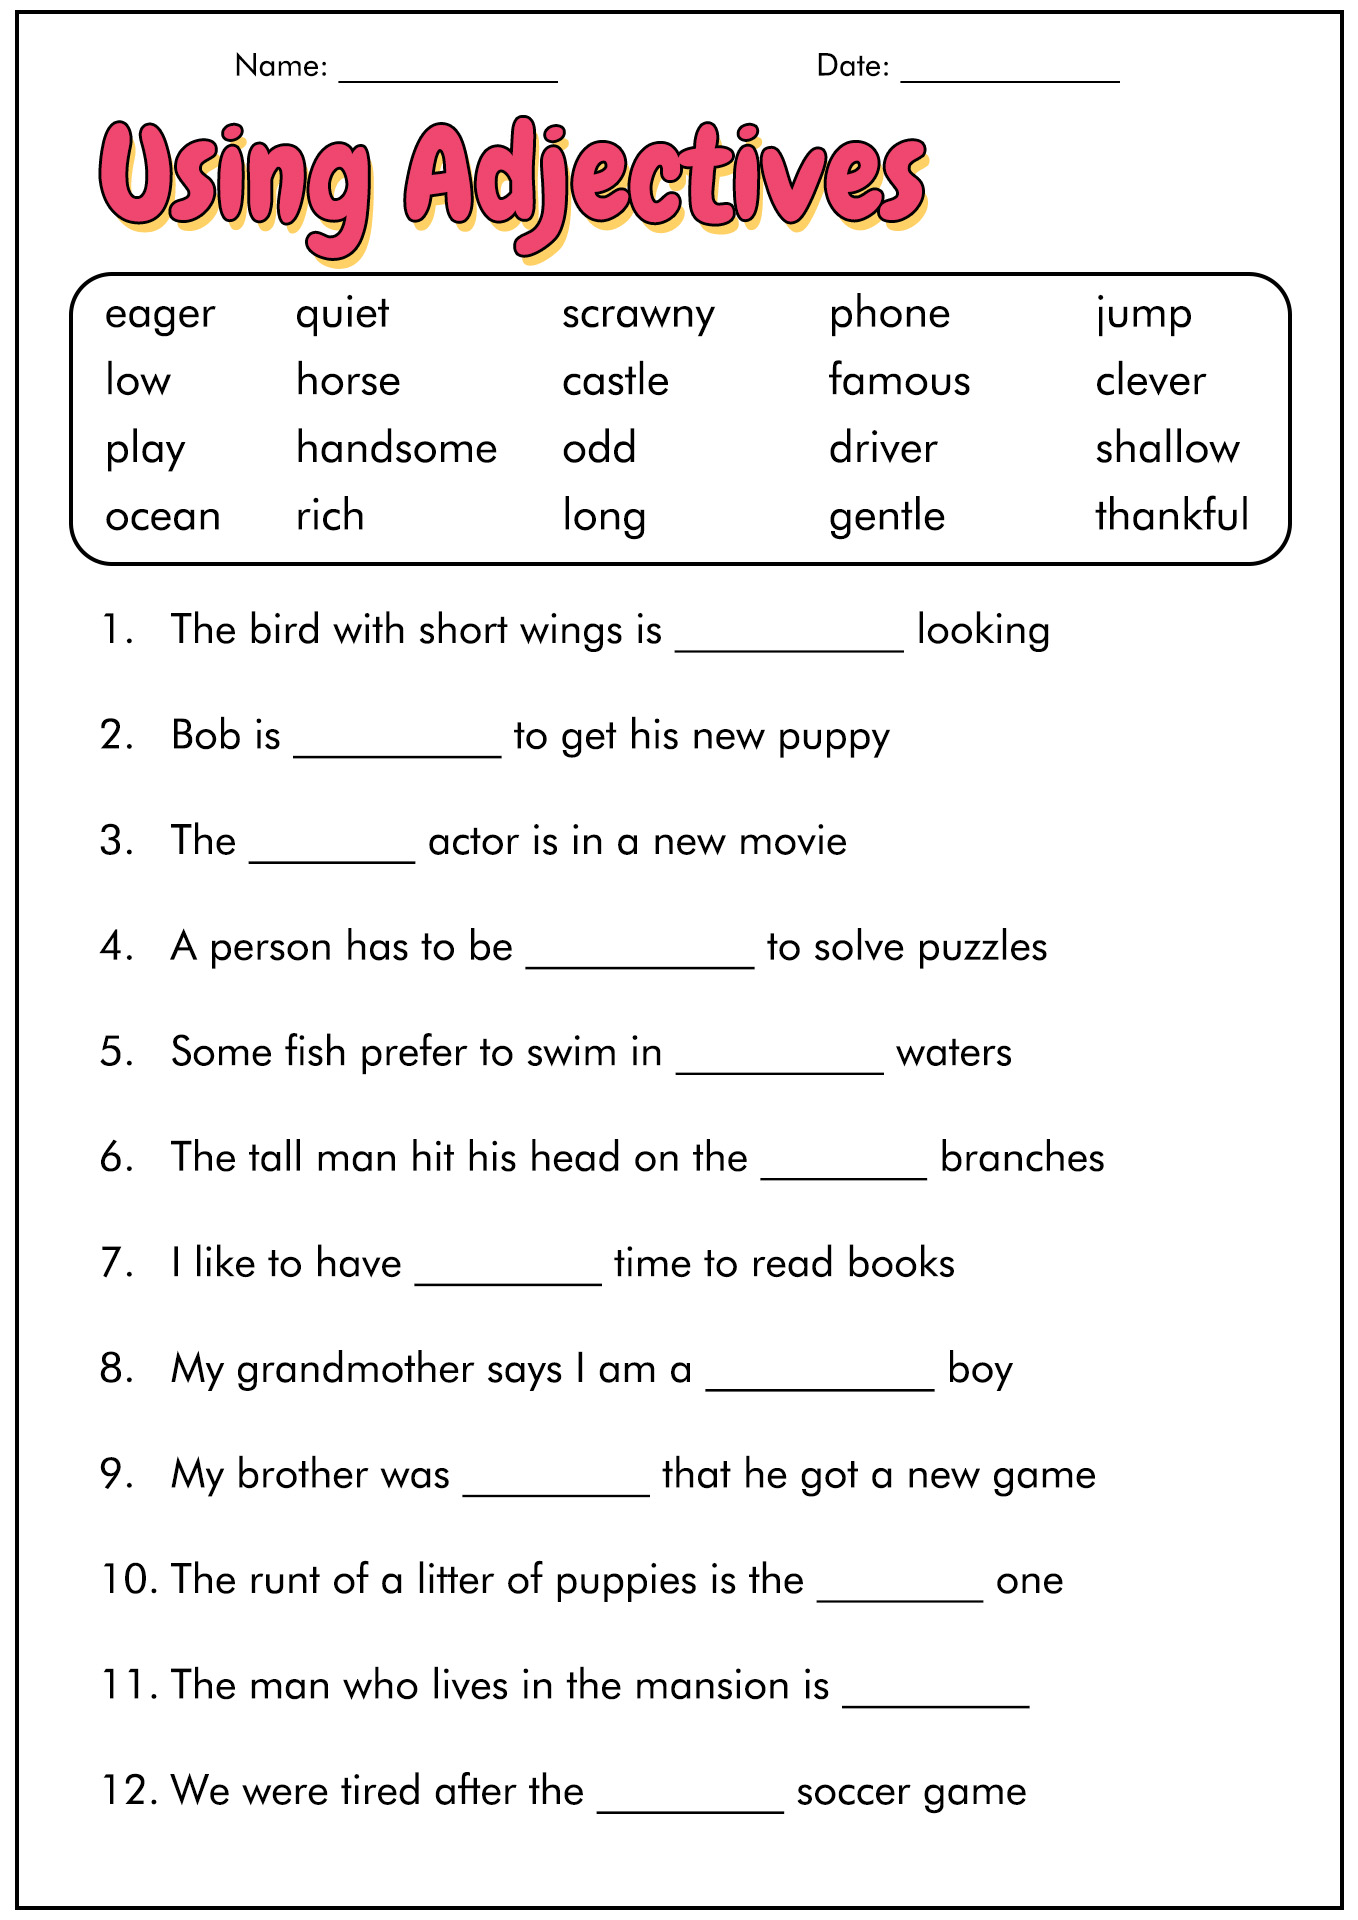 english-worksheets-5th-grade-common-core-worksheets